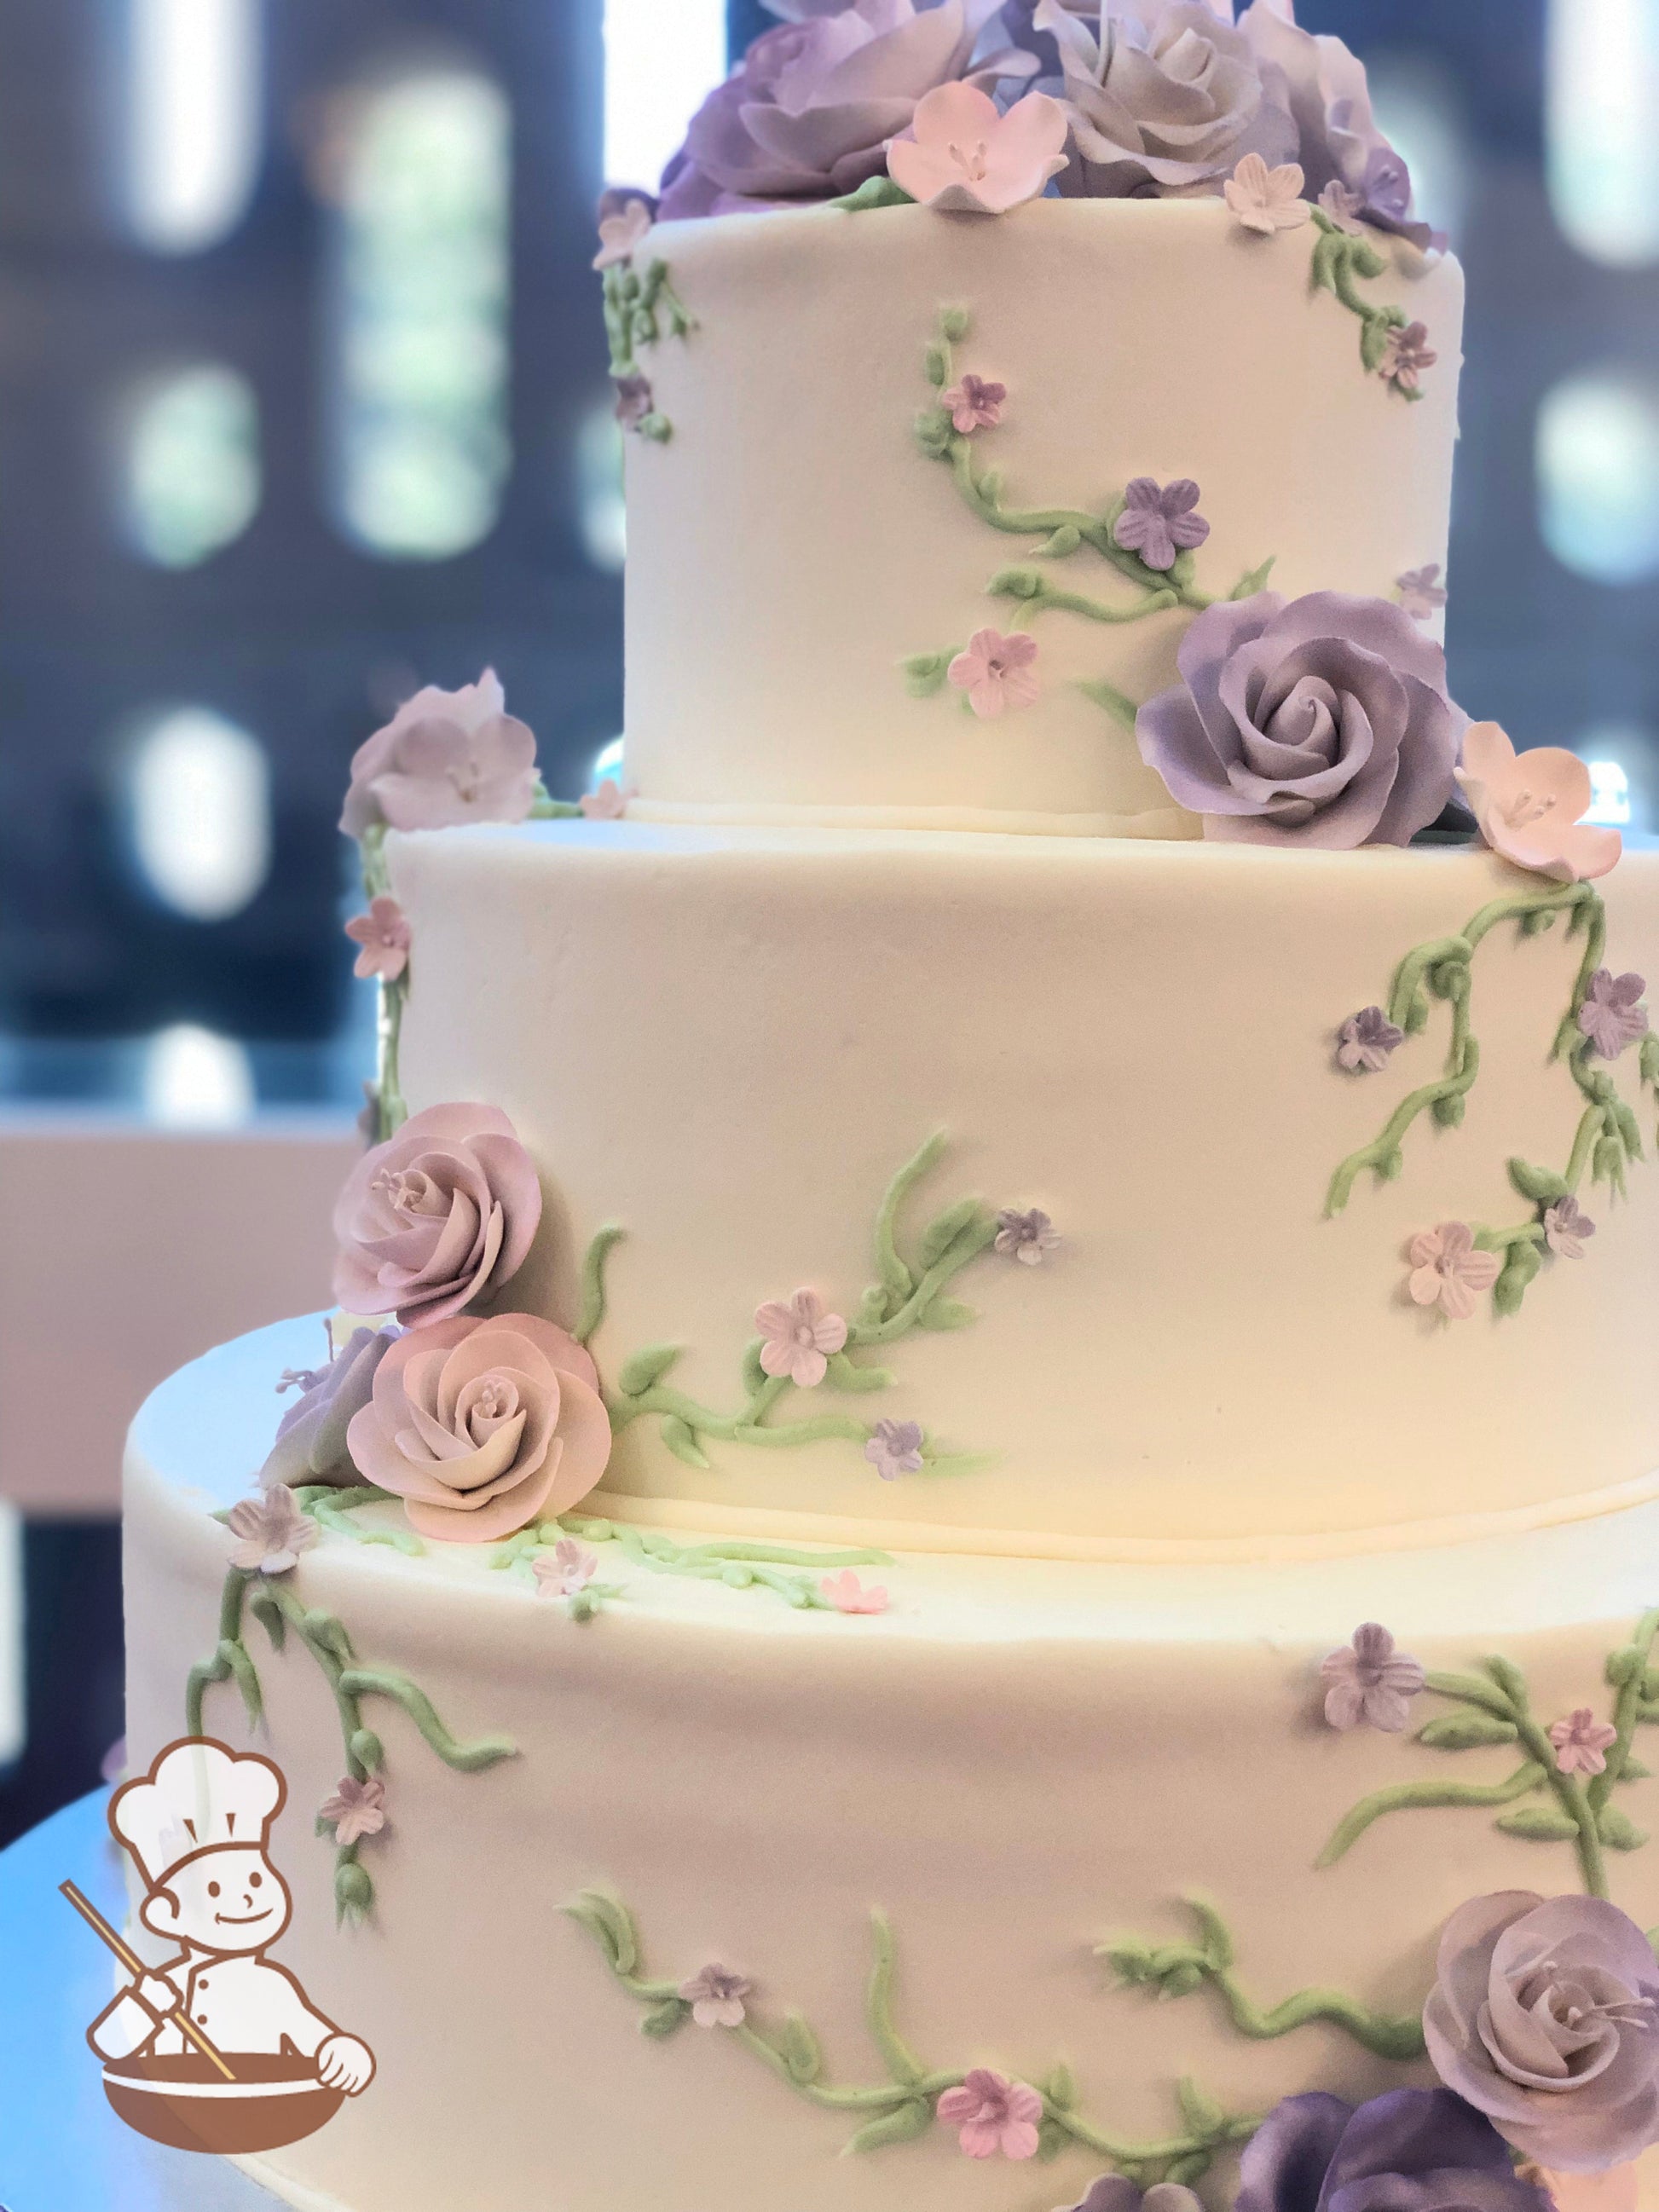 3 tier round wedding cake in buttercream with vine piping and fondant and sugar flowers decorations in pinks and purples.